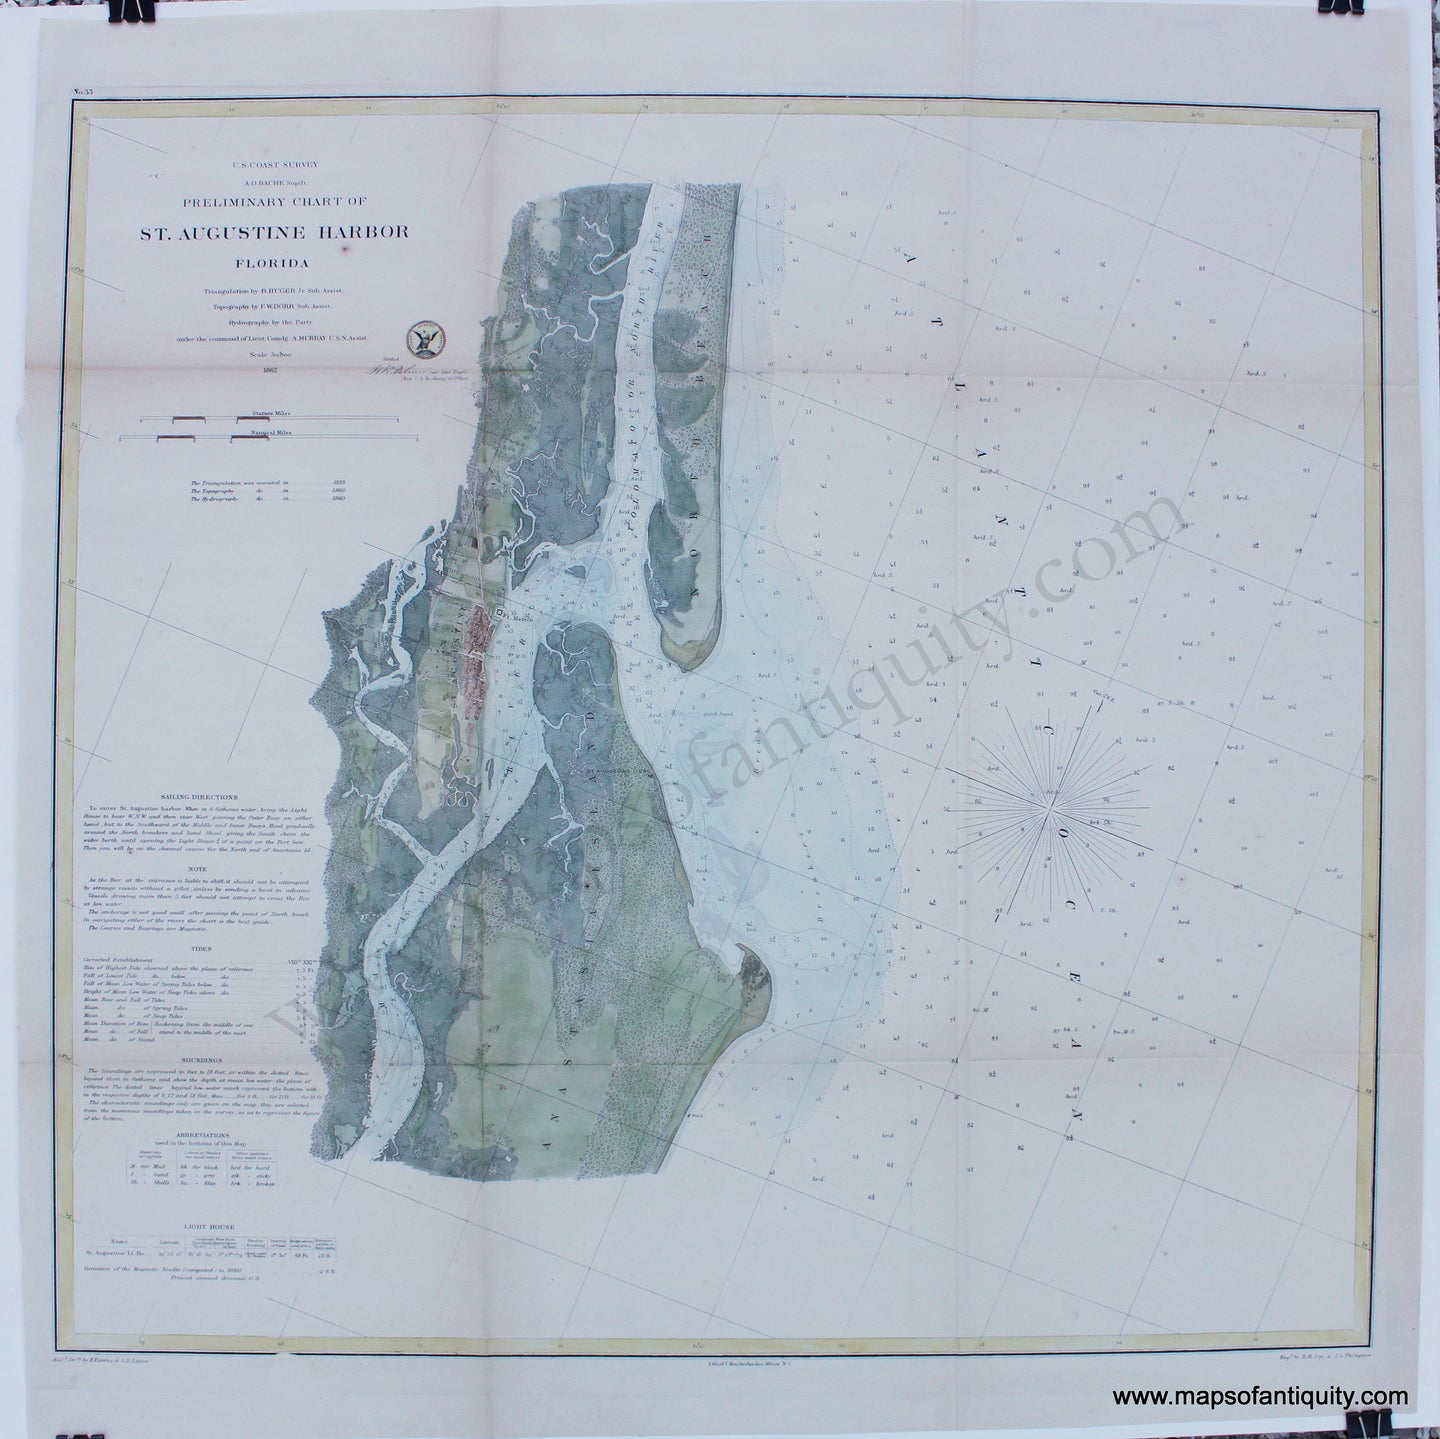 Genuine-Hand-Colored-Antique-Chart-Preliminary-Chart-of-St-Augustine-Harbor-Florida--1862-US-Coast-Survey-Maps-Of-Antiquity